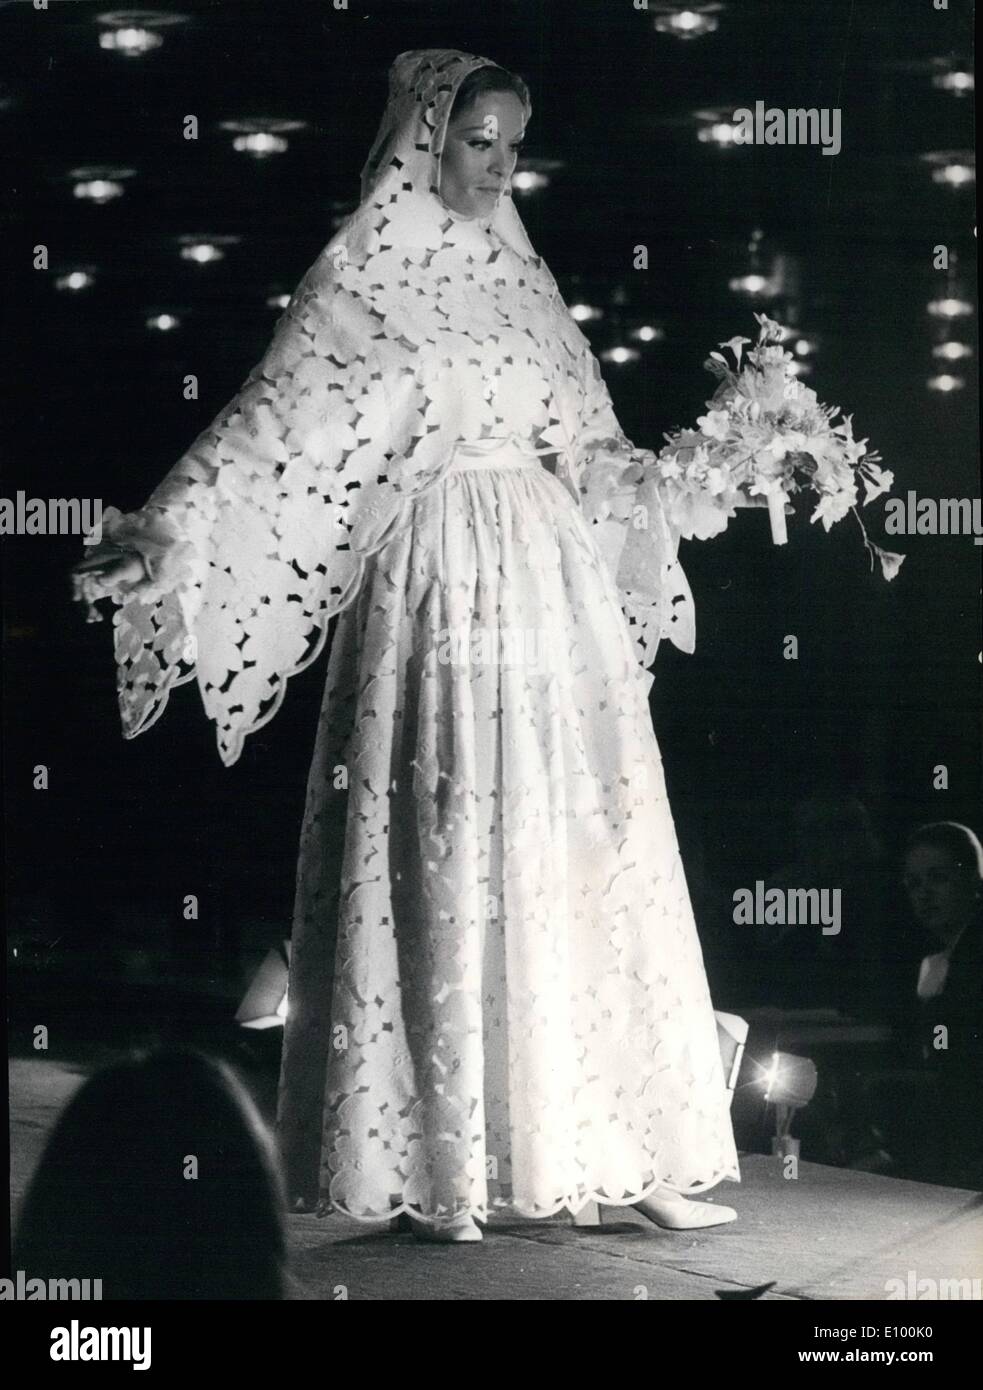 Feb. 02, 1972 - Rencontre de la jeune mode. Photo shows Specially the section ''Wedding dress'' attraced the interest of the prominent guests of this important fashion event in Sankt Gallon. Stock Photo